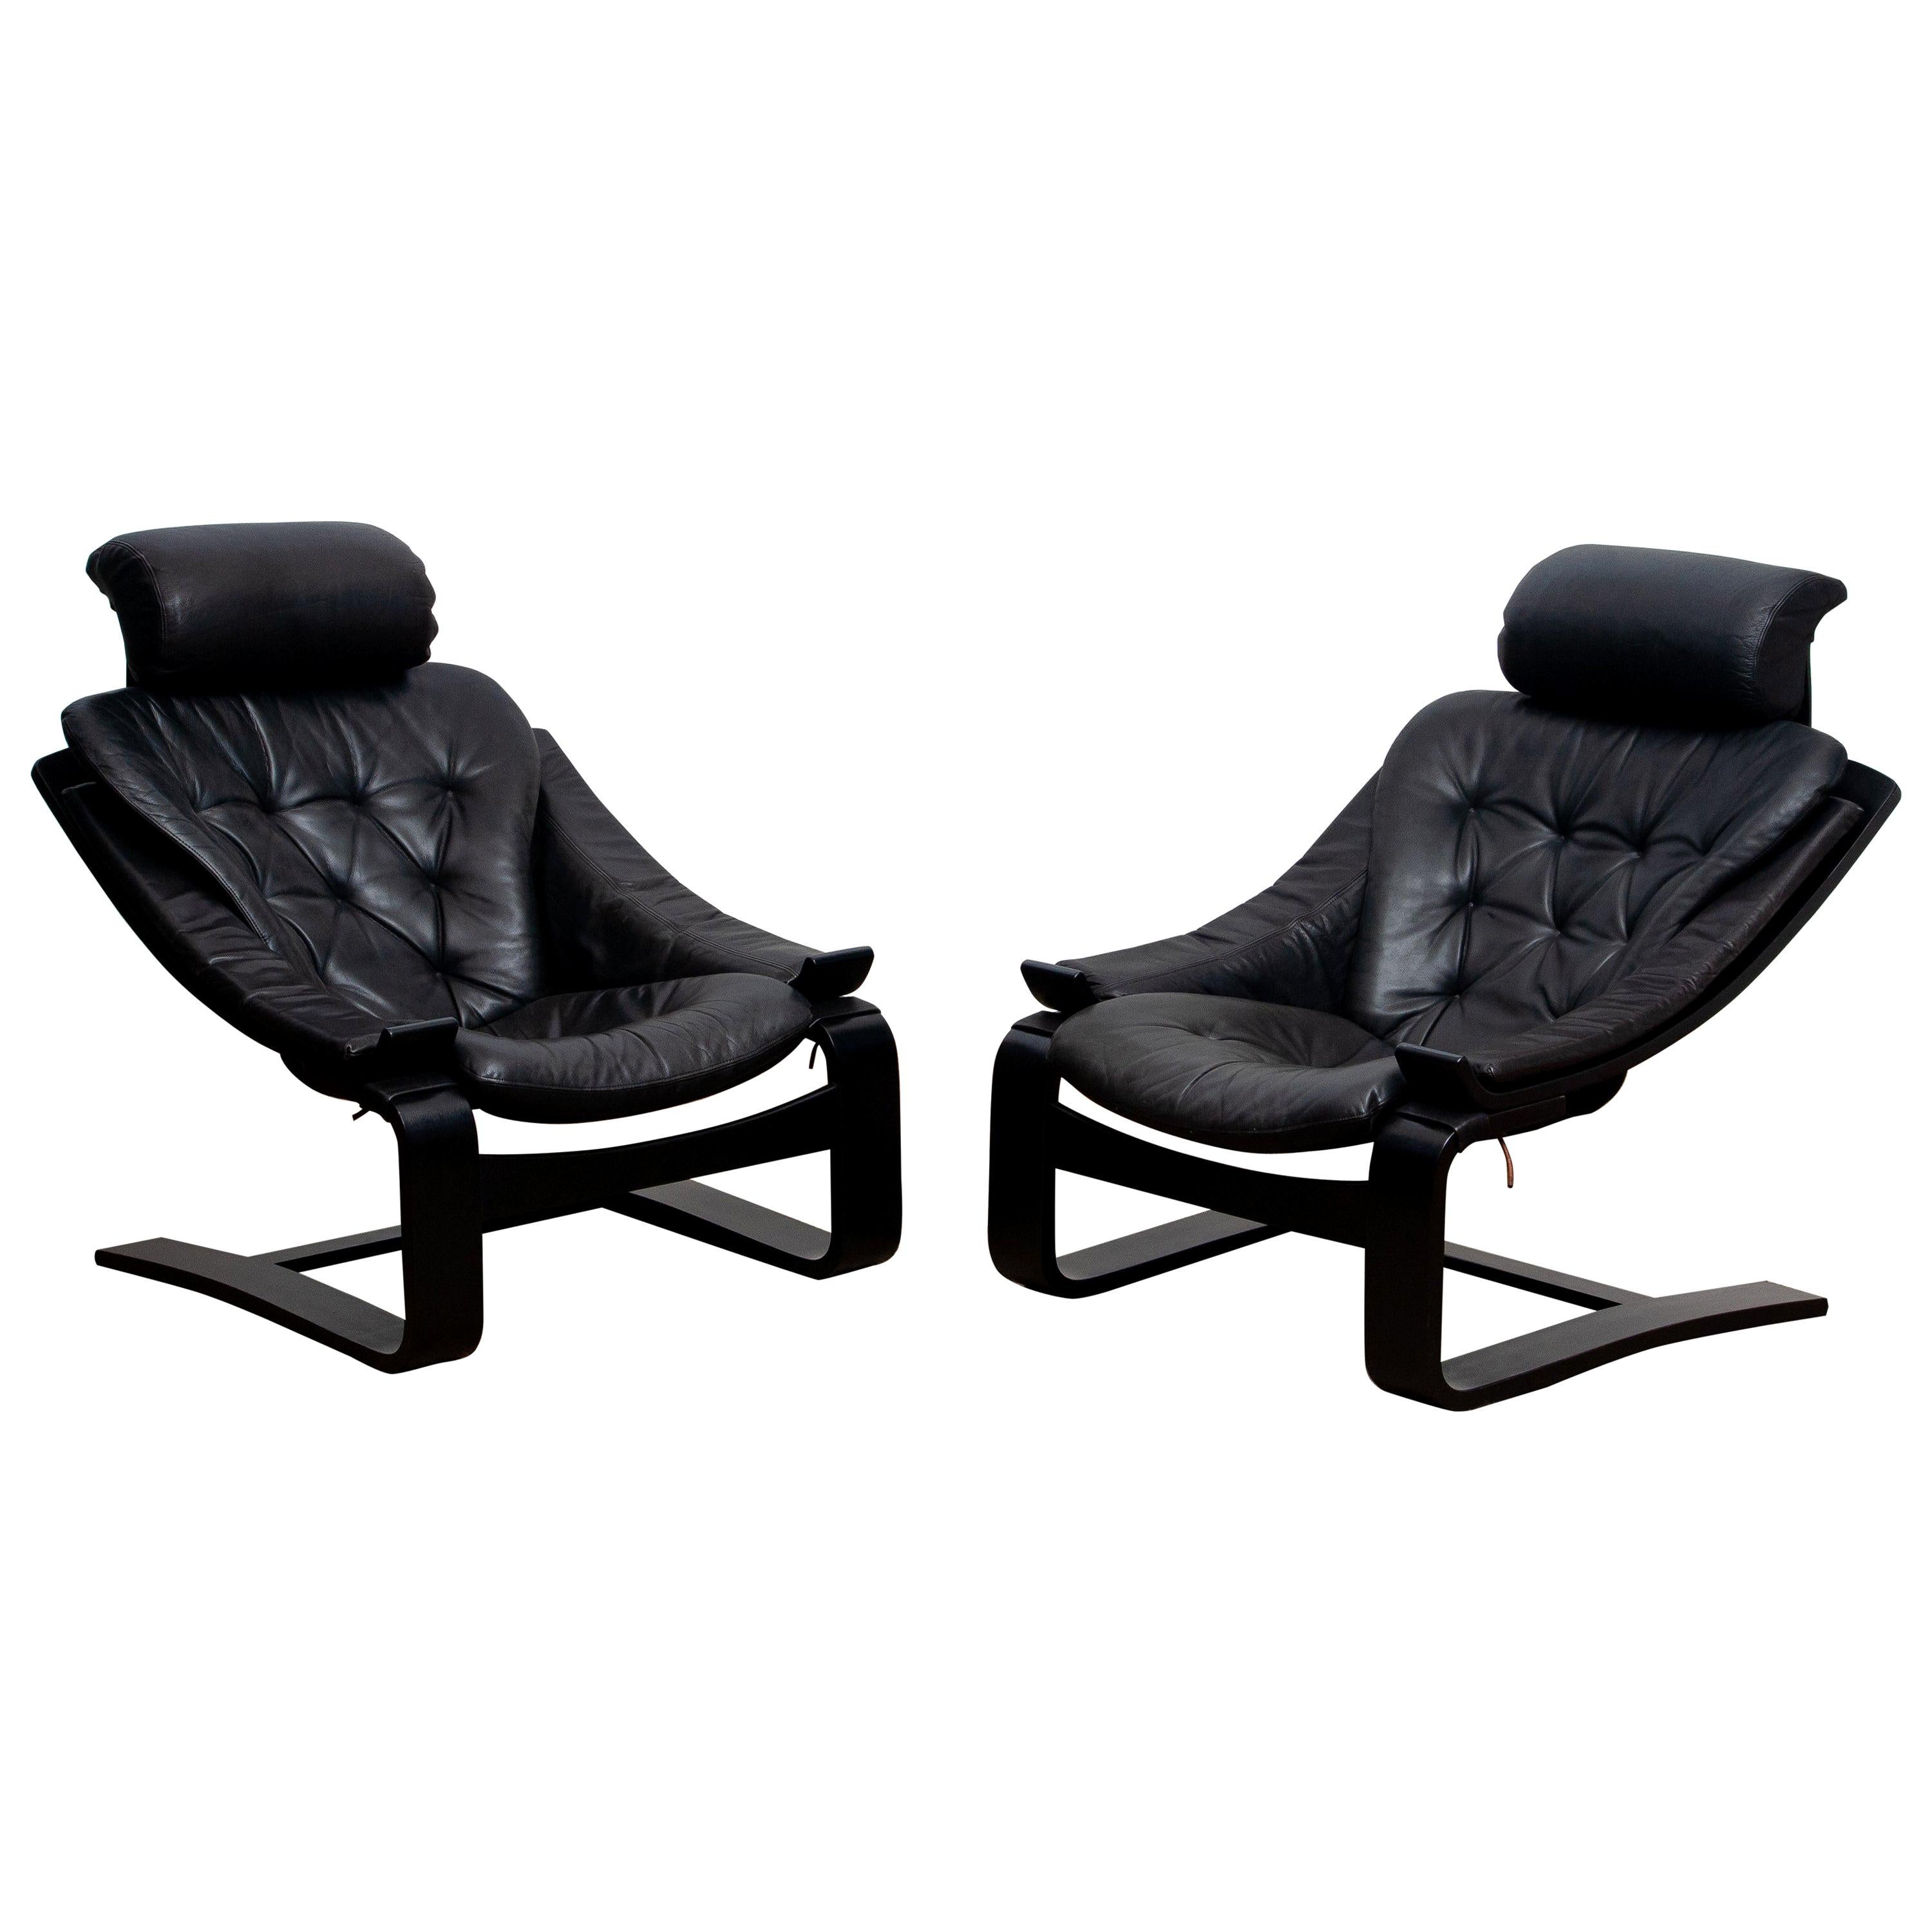 Scandinavian Modern 1970s, Pair of Kroken Lounge Chairs by Ake Fribytter for Nelo Sweden in Leather